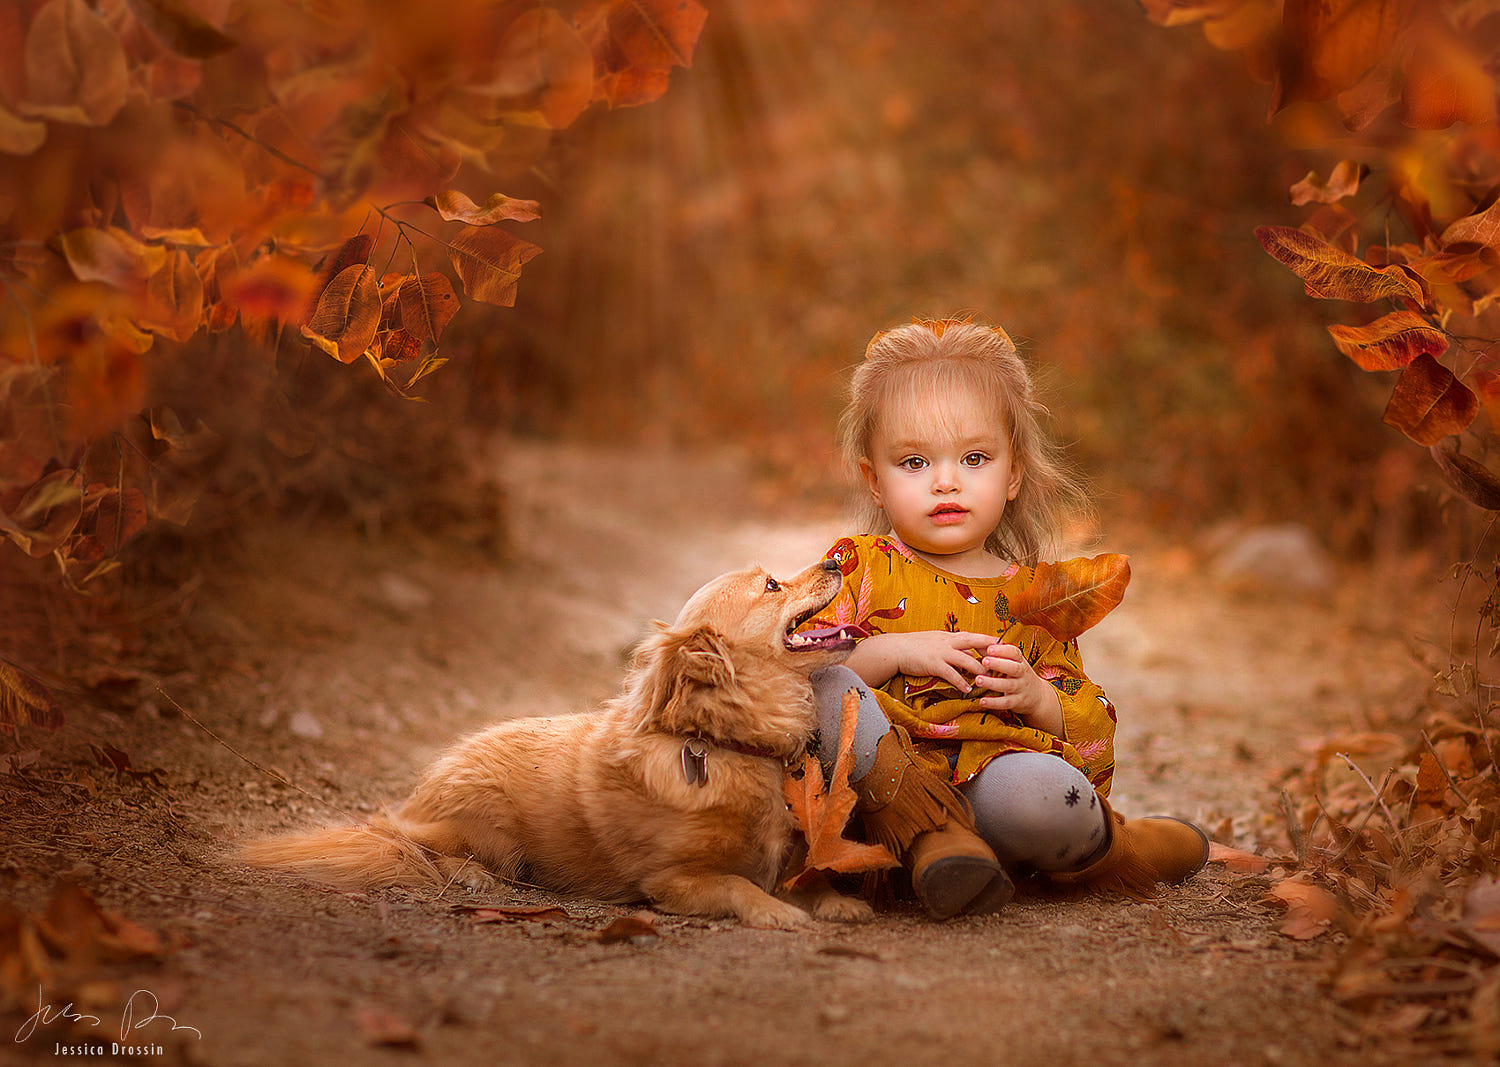 Baby Portrait Photography Ideas By Jessica Drossin 6 Full Image